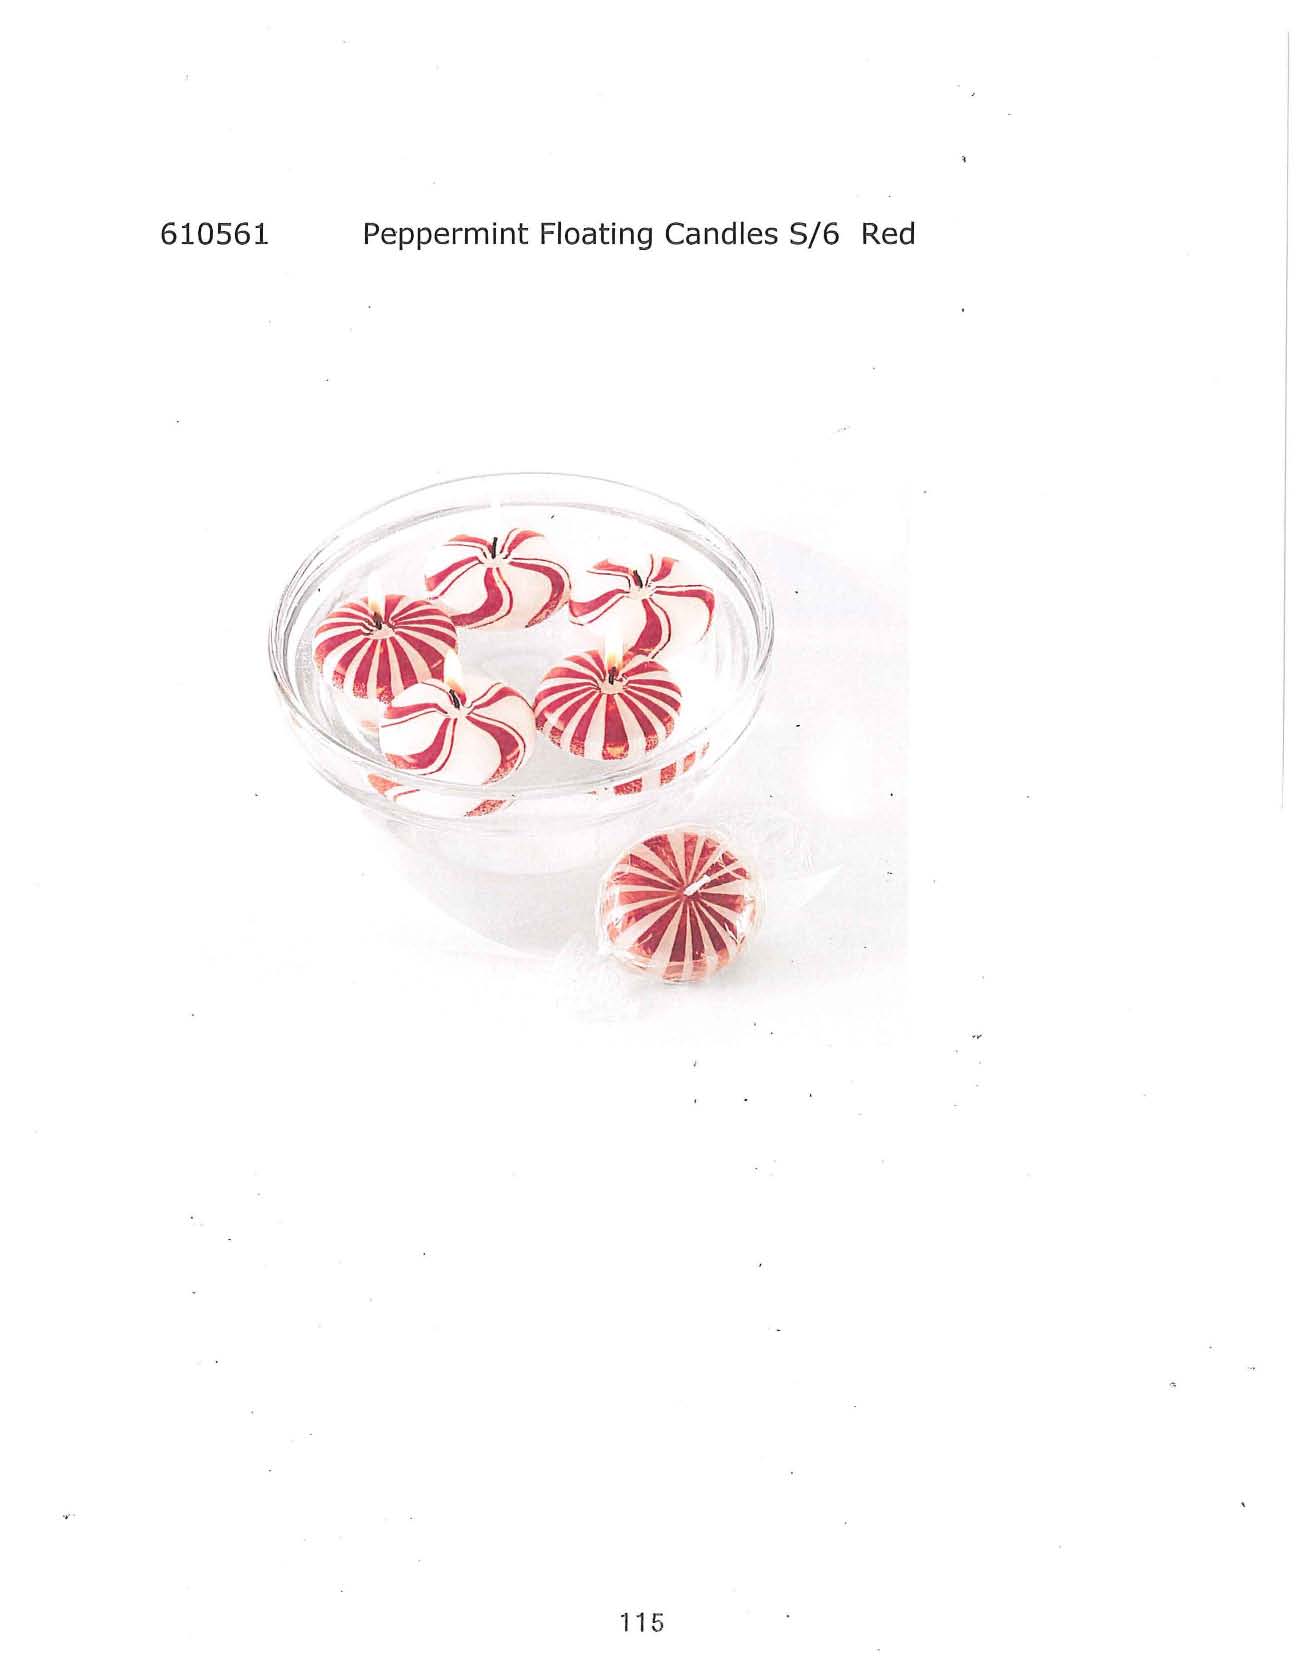 Peppermint Floating Candle s/6 - Red